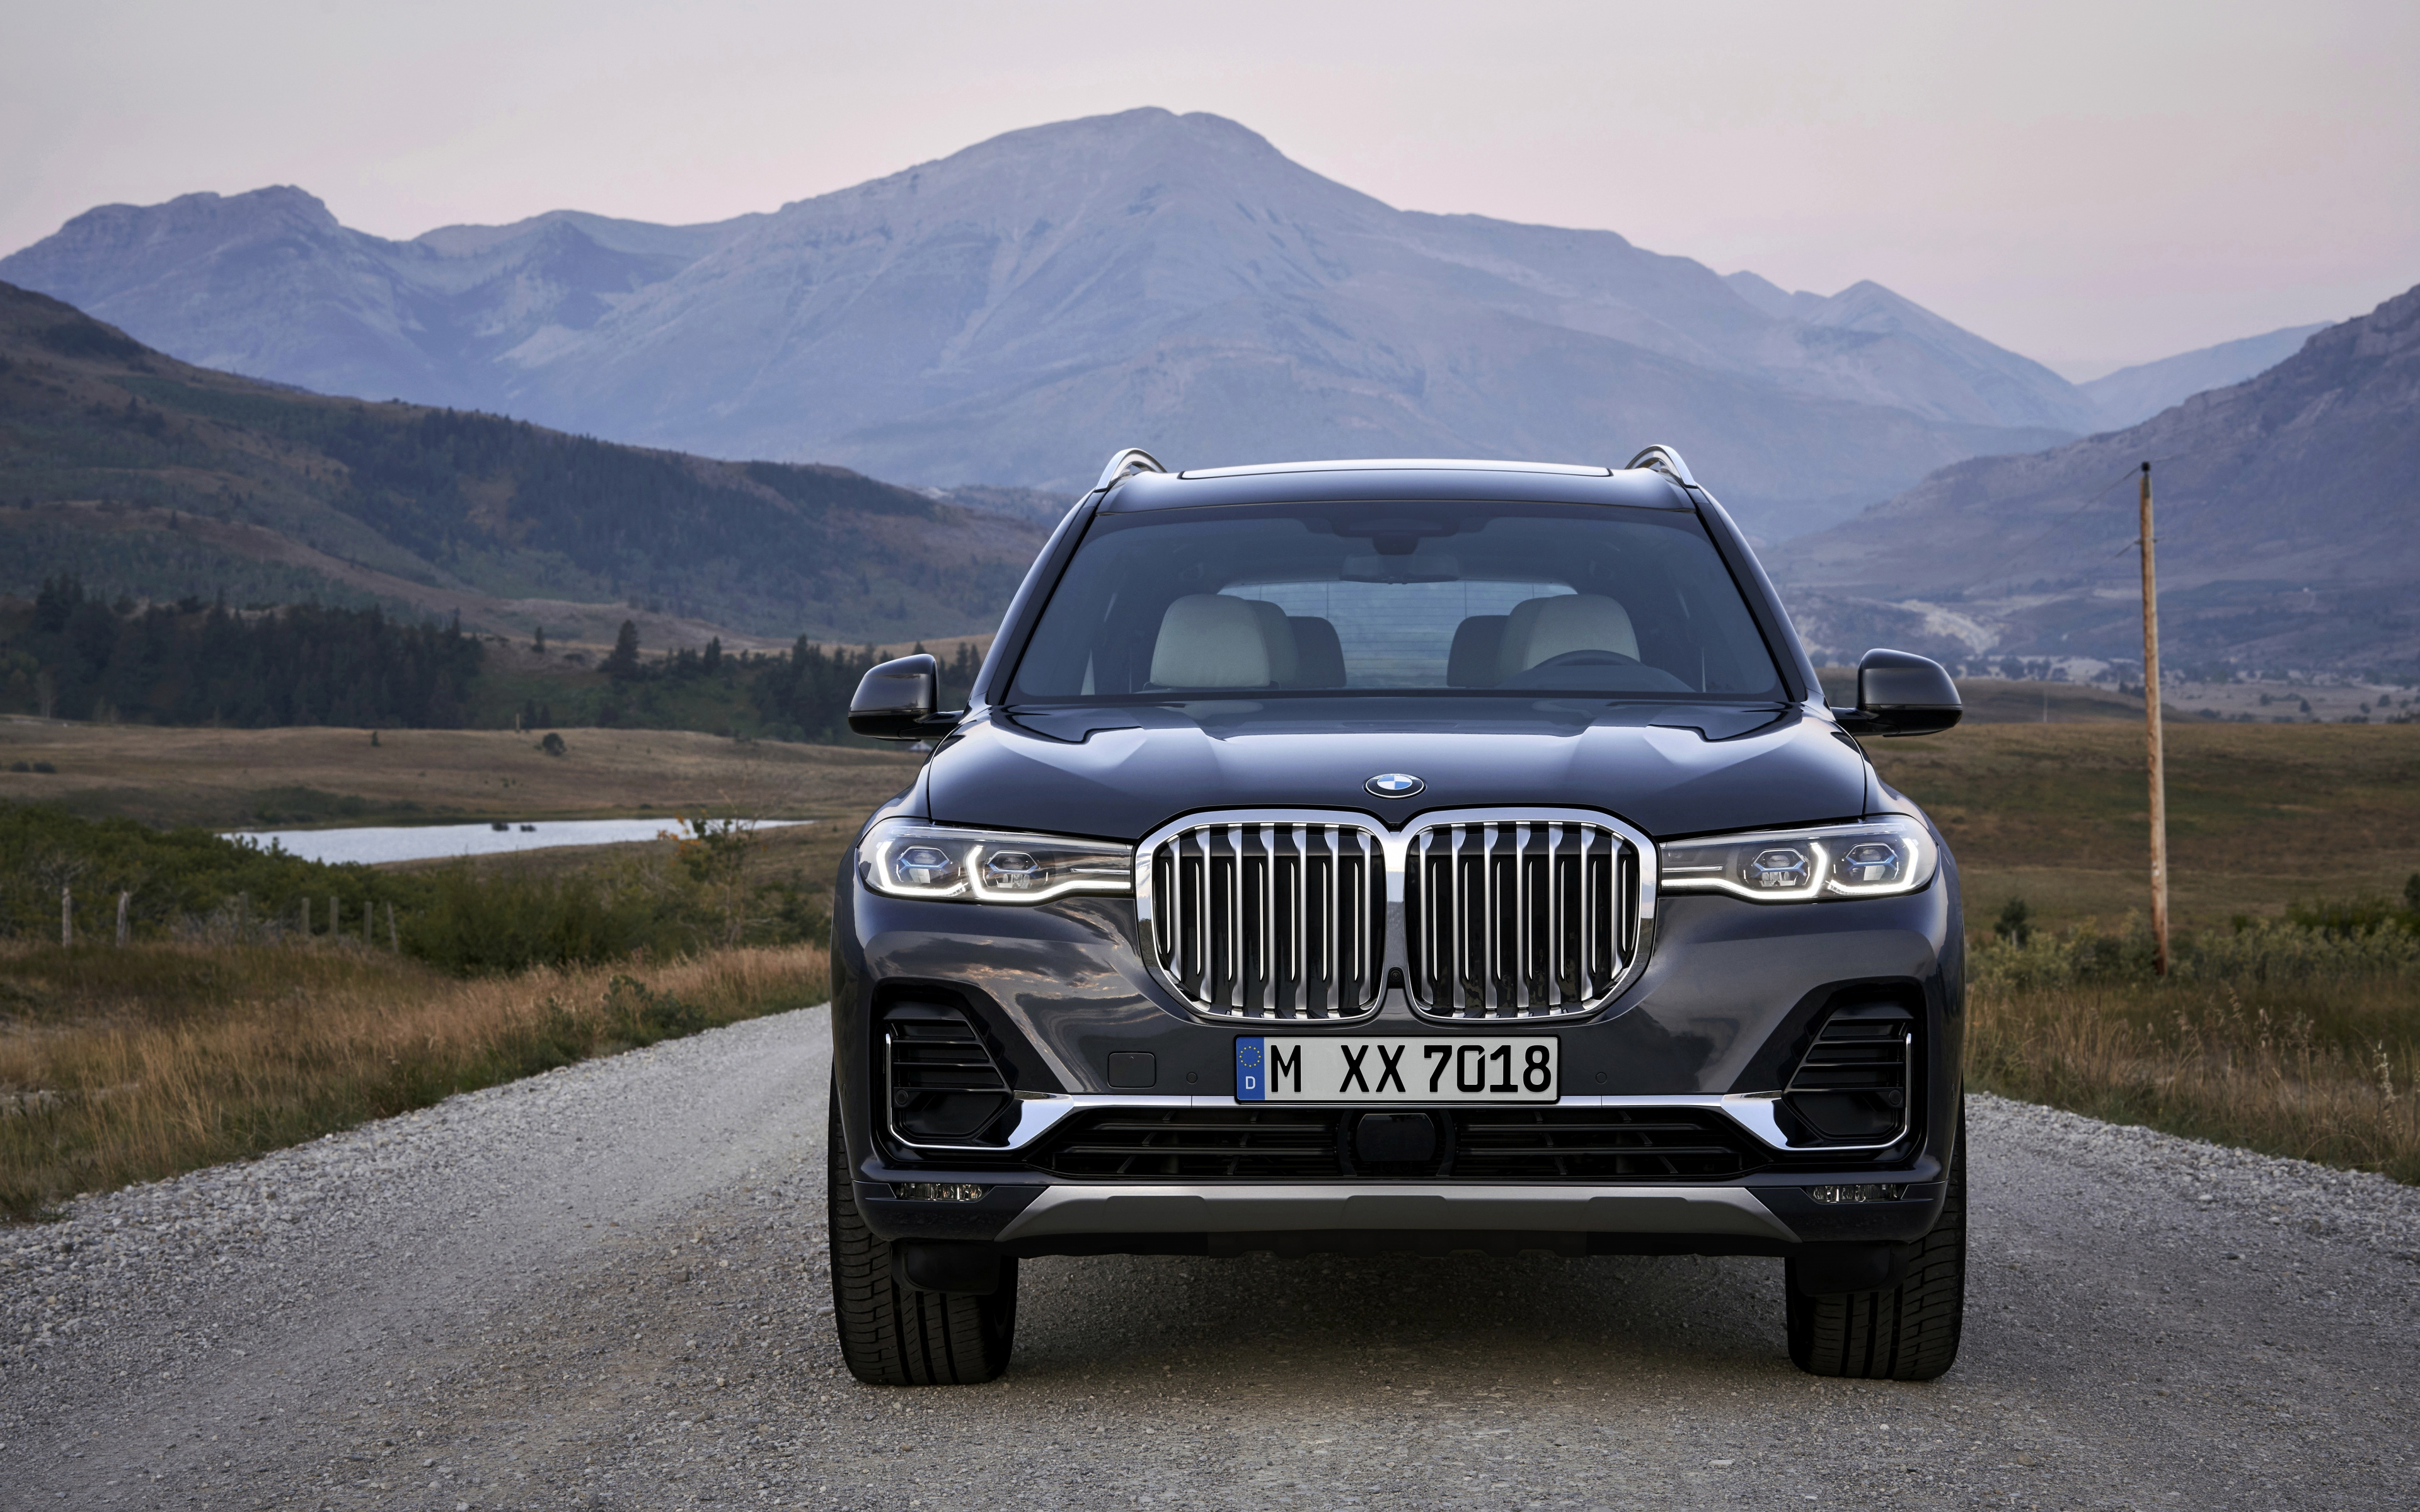 Download wallpapers BMW X7 4k luxury cars G07 2019 cars SUVs HDR  2019 BMW X7 BMW G07 german cars BMW for desktop free Pictures for  desktop free